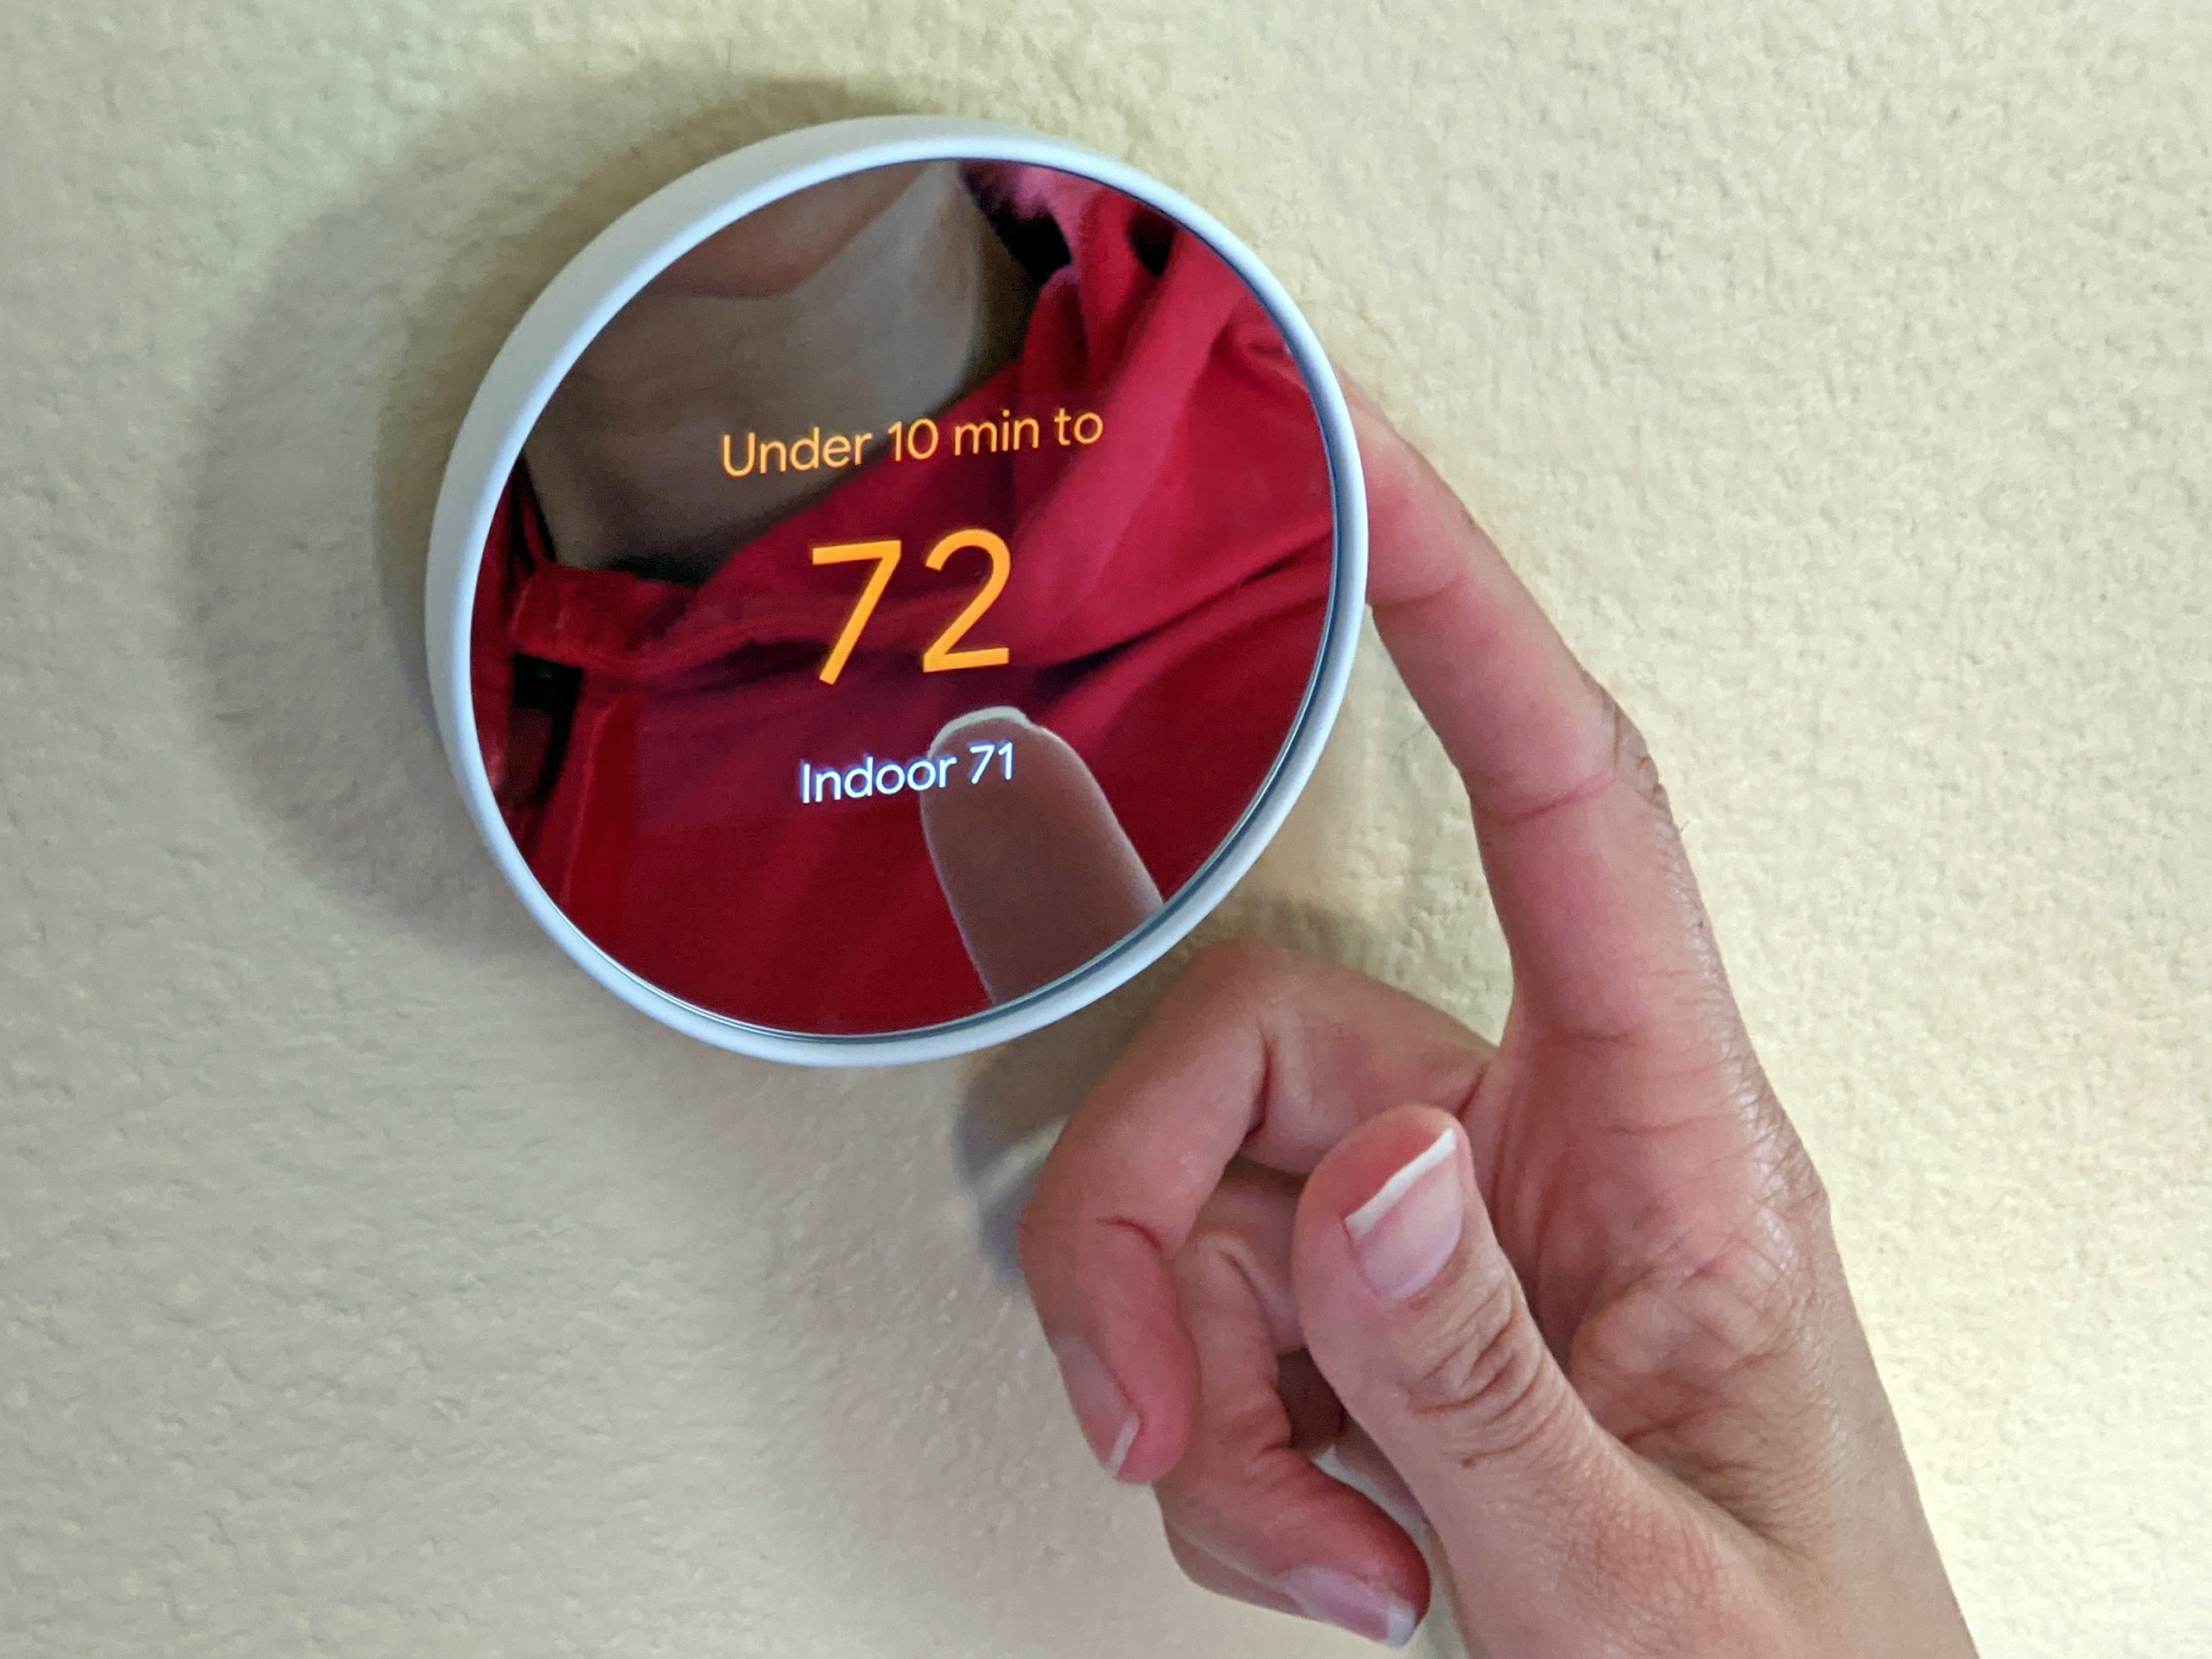 How To Remove A Thermostat How To Remove a Nest Thermostat From the Wall | Digital Trends